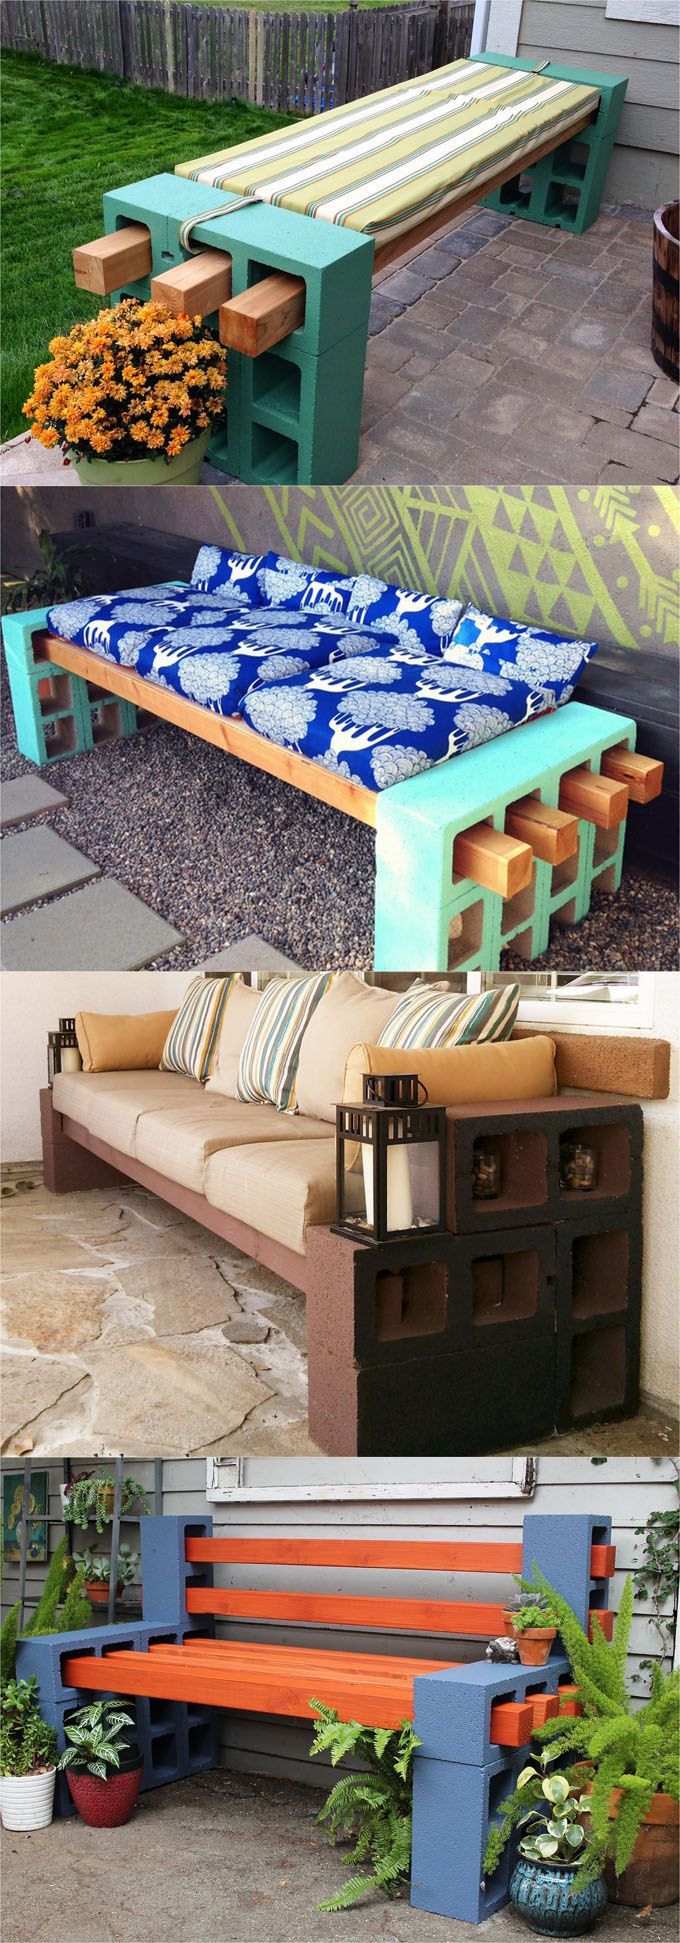 21 beautiful DIY benches for every room. Great tutorials on how to build benches easily out of wood, concrete blocks, or even old